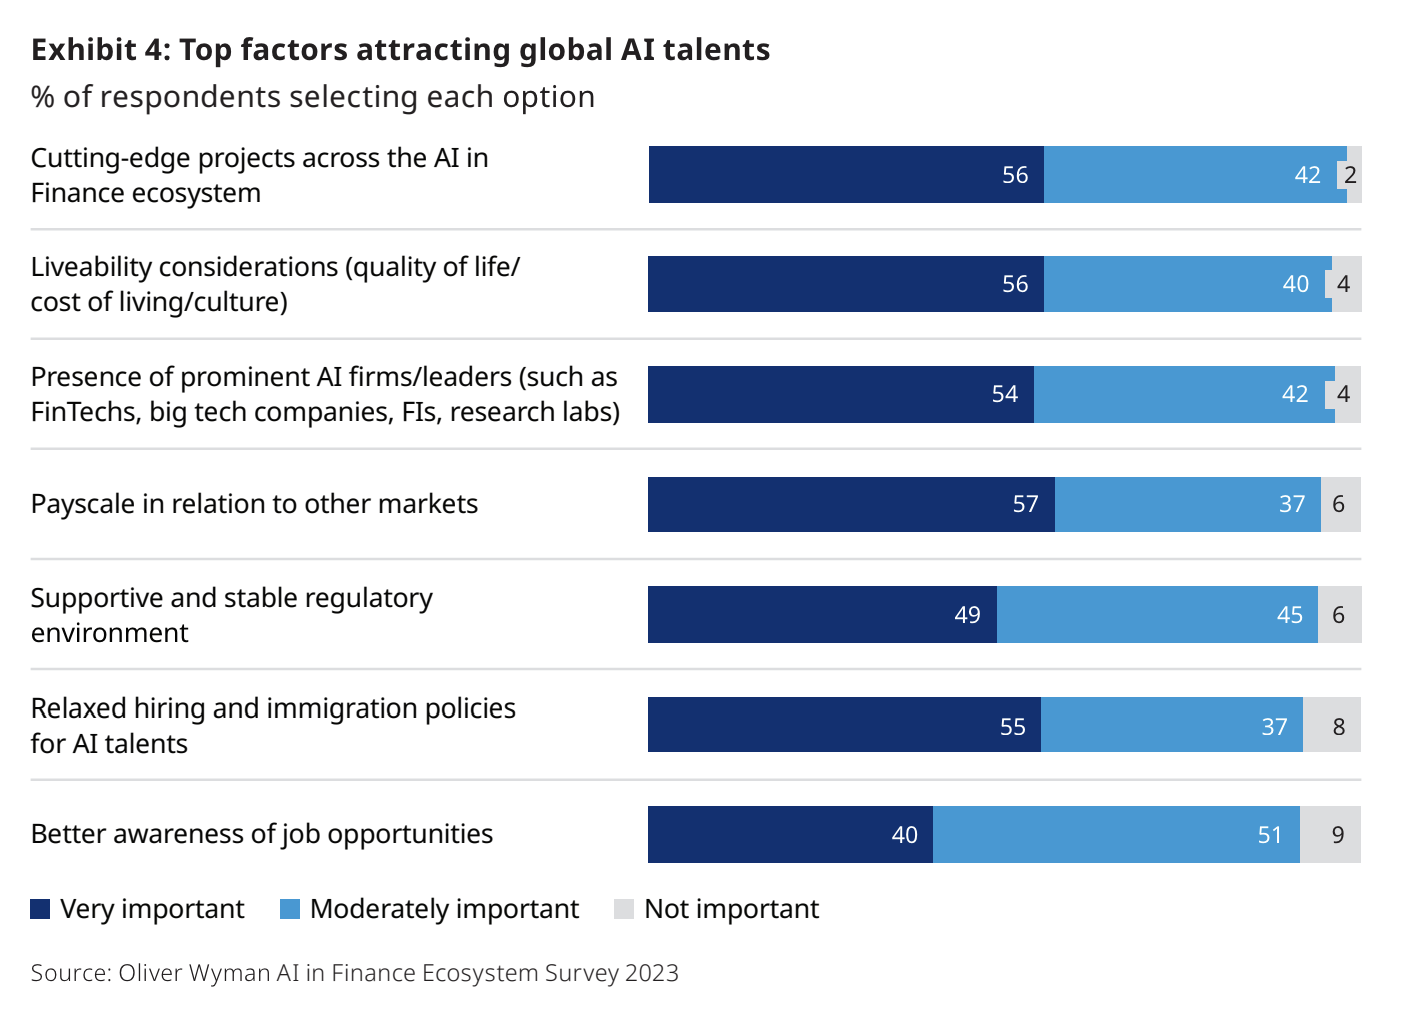 Top factors attracting global AI talents, Source: Oliver Wyman AI in Finance Ecosystem Survey 2023